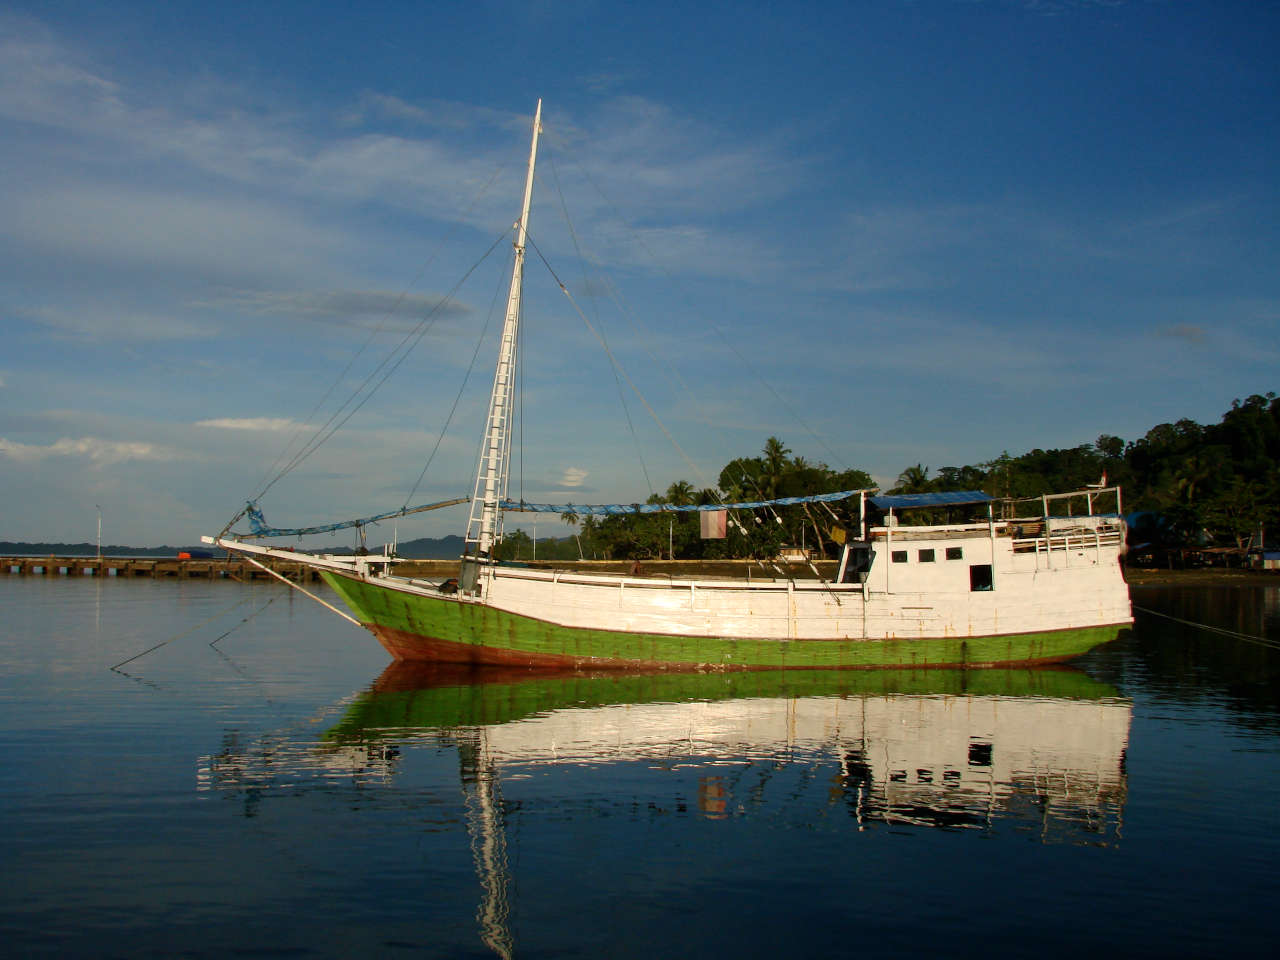 Indonesian fishing boat in harbour